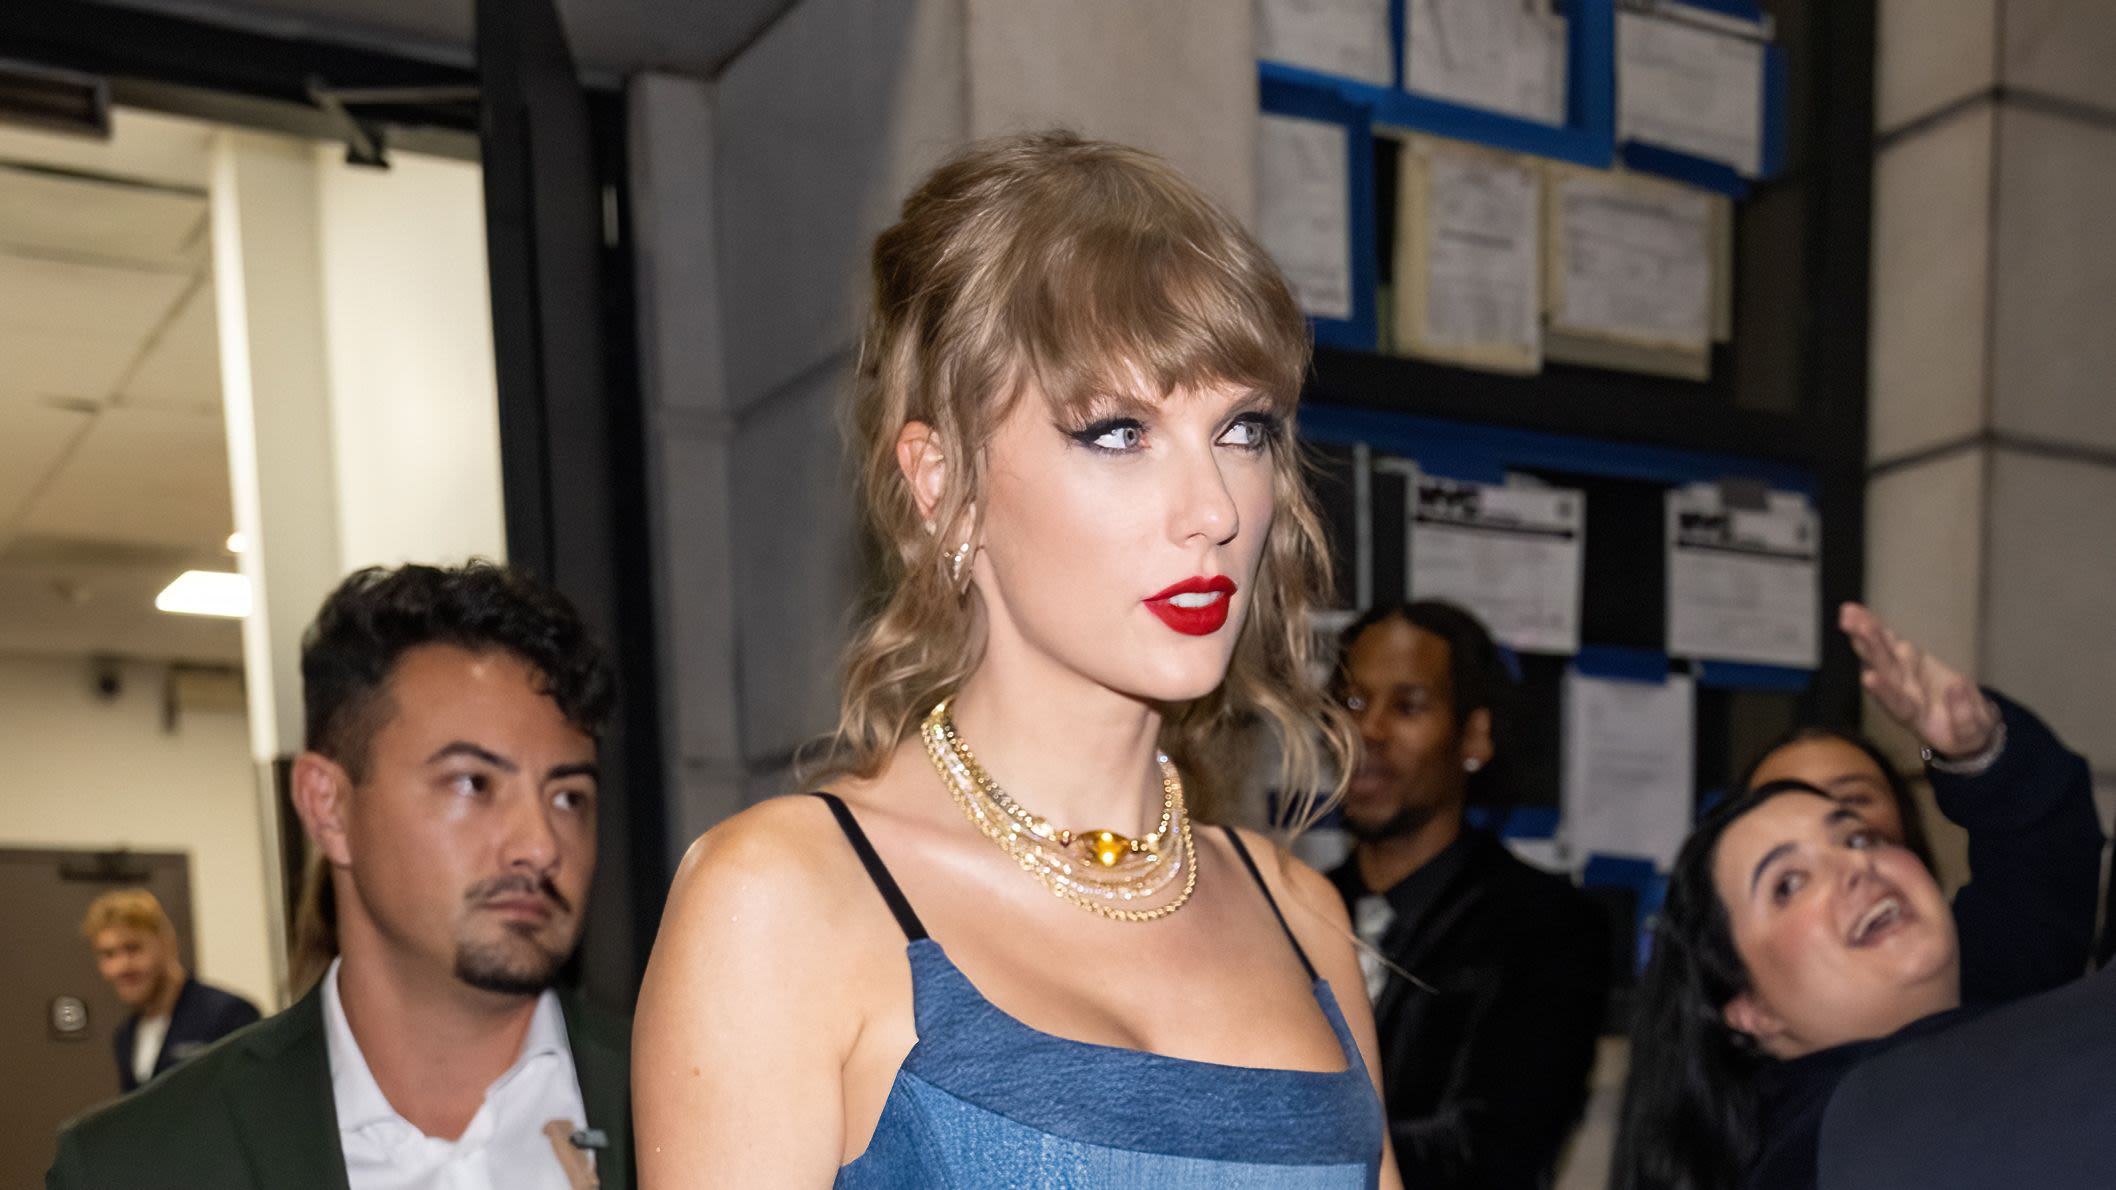 New Photos Show Taylor Swift Wearing Two Cool Minidresses In Las Vegas